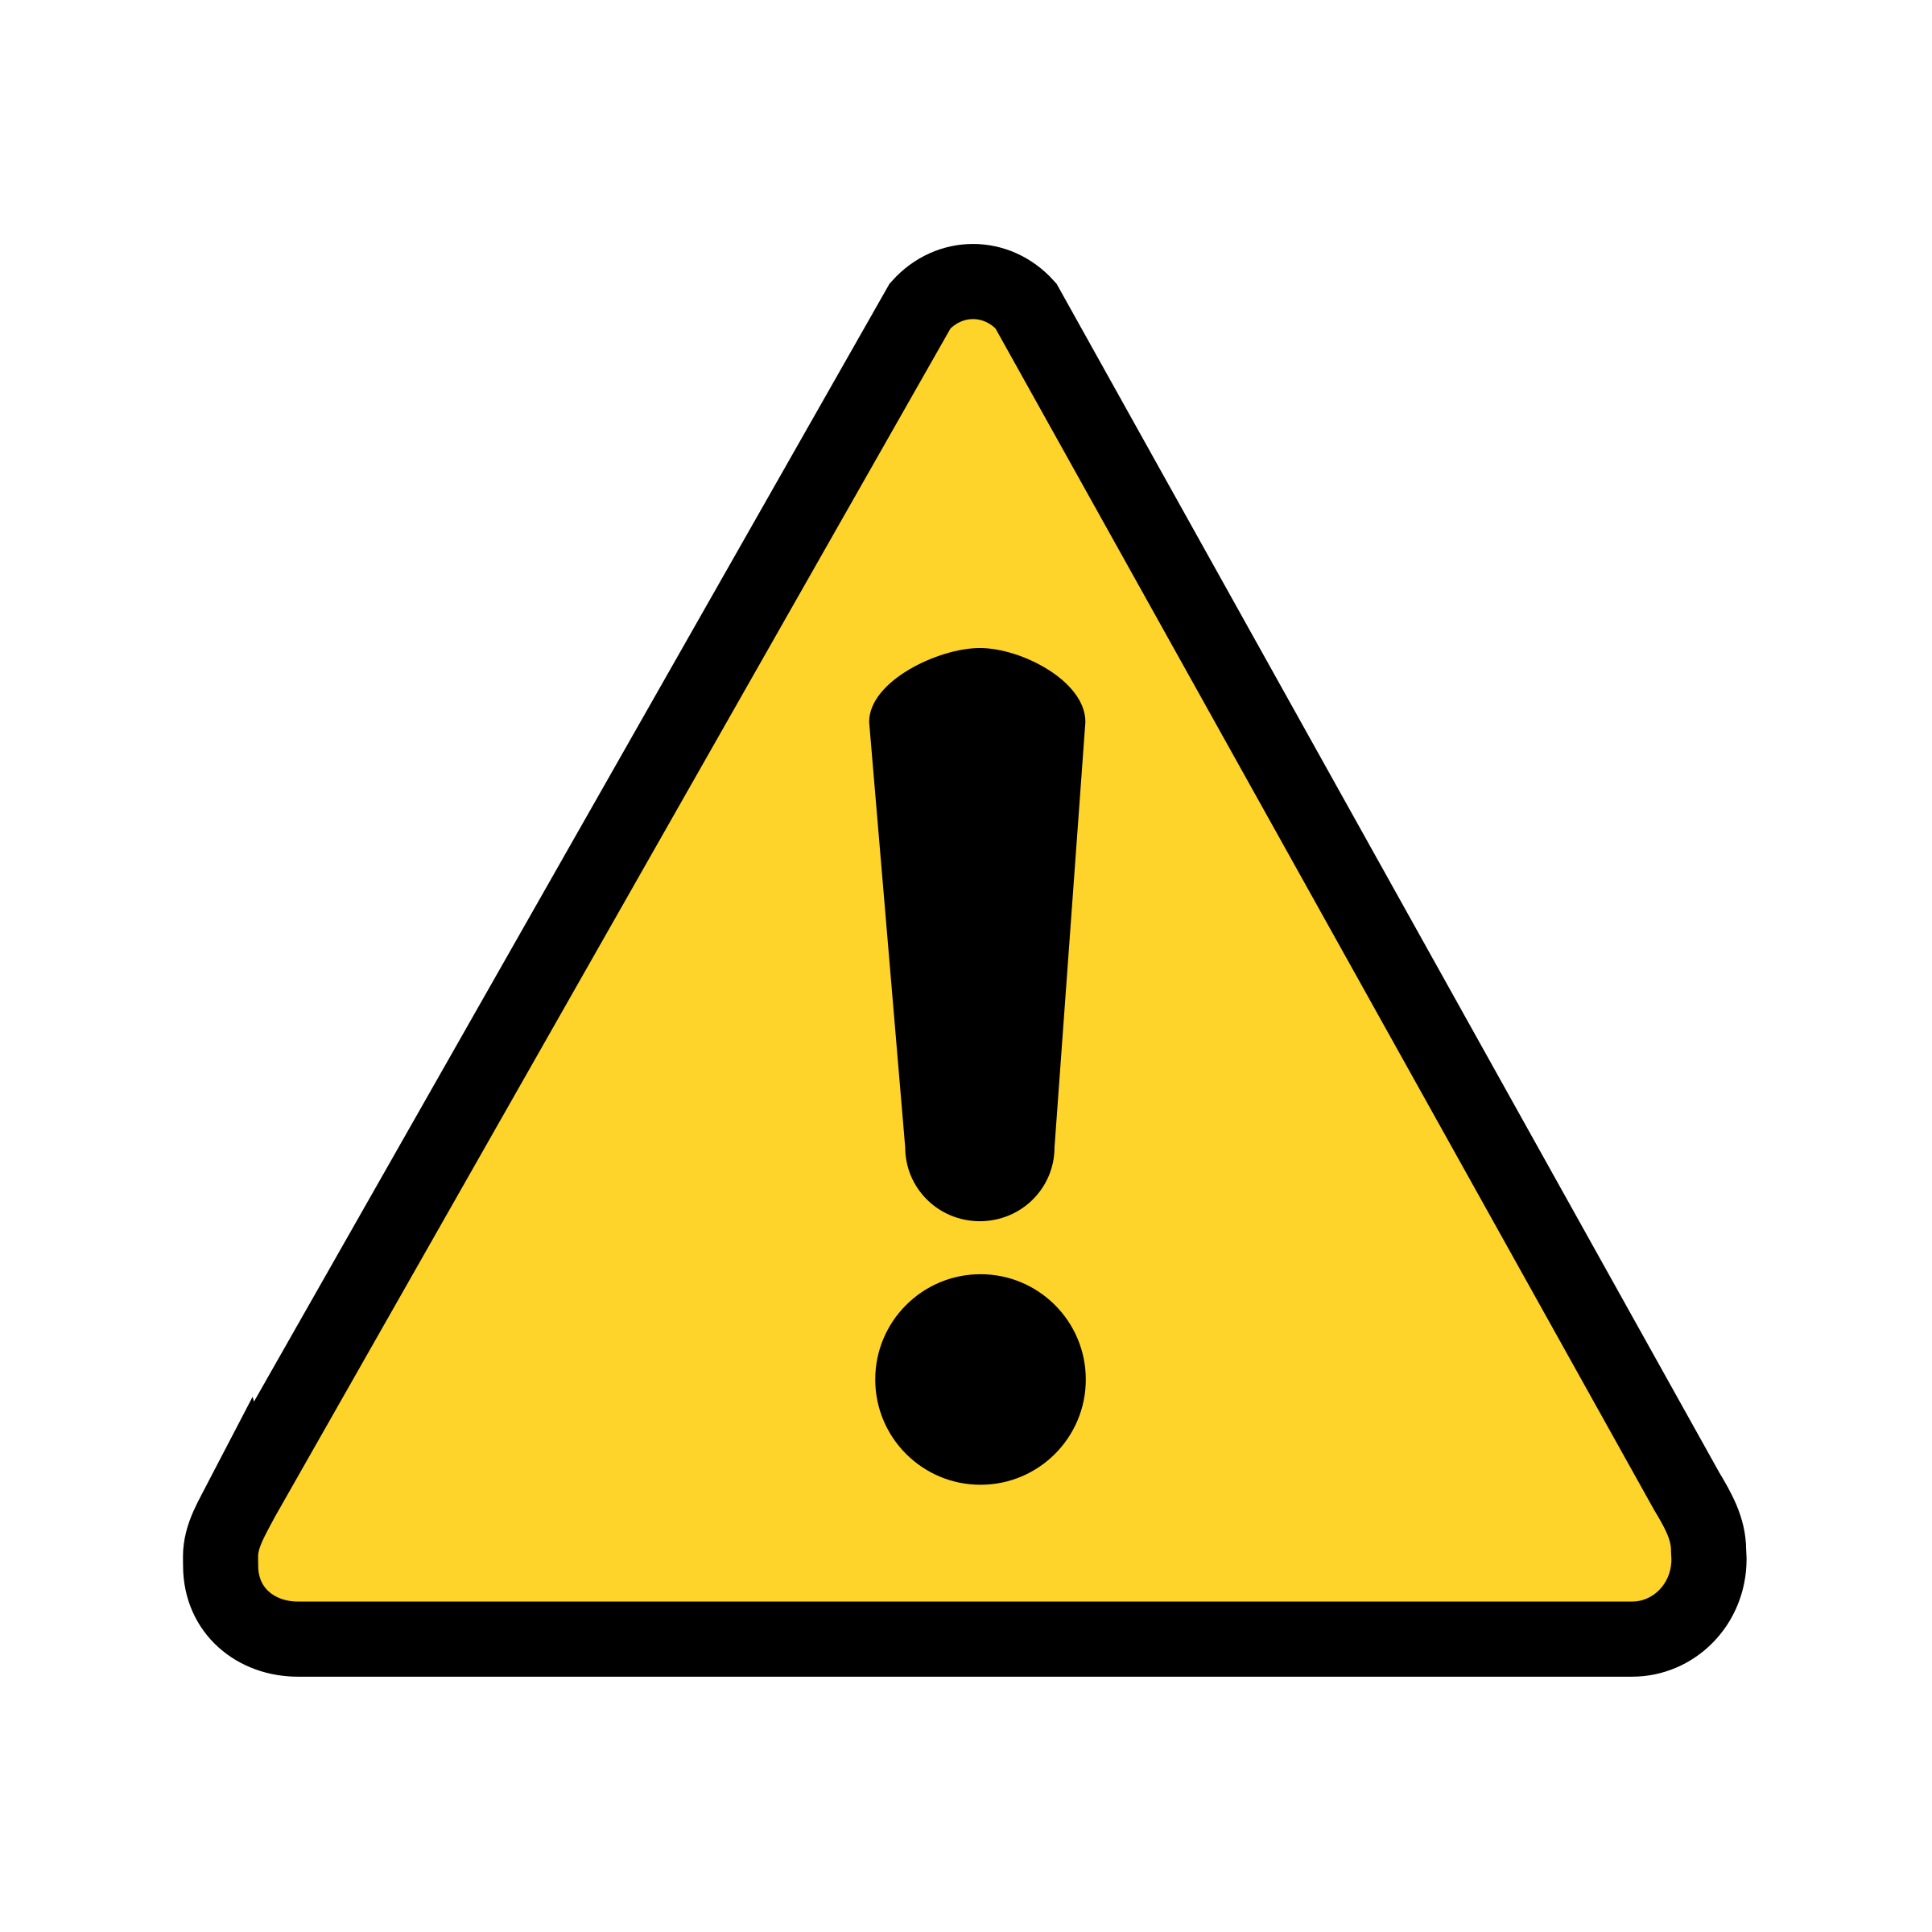 Poison clipart safety sign. Warning icon transparent png